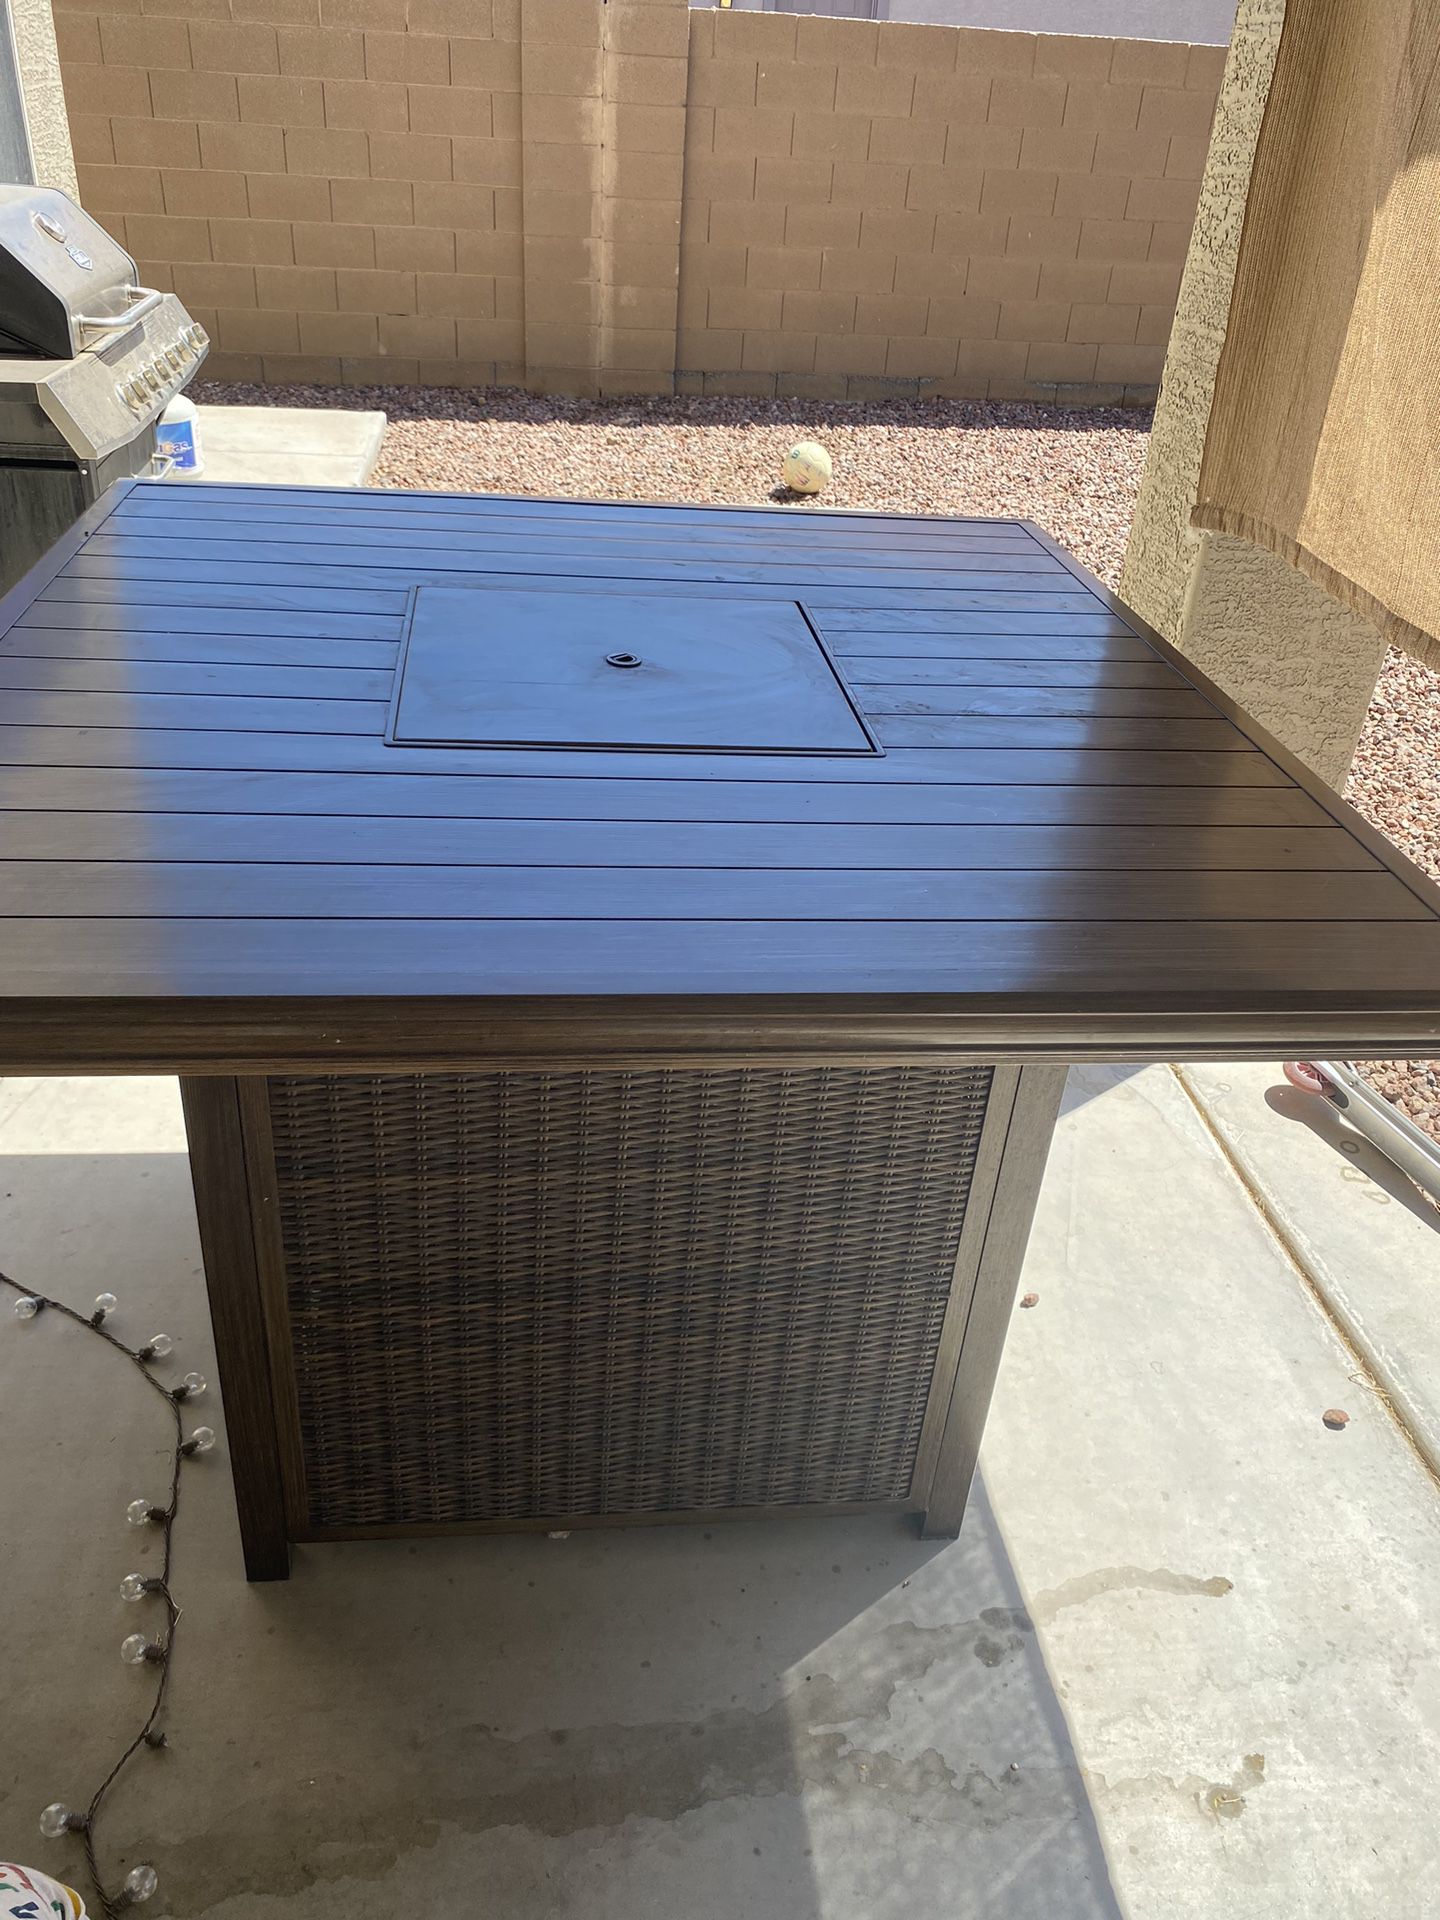 Outdoors Table 